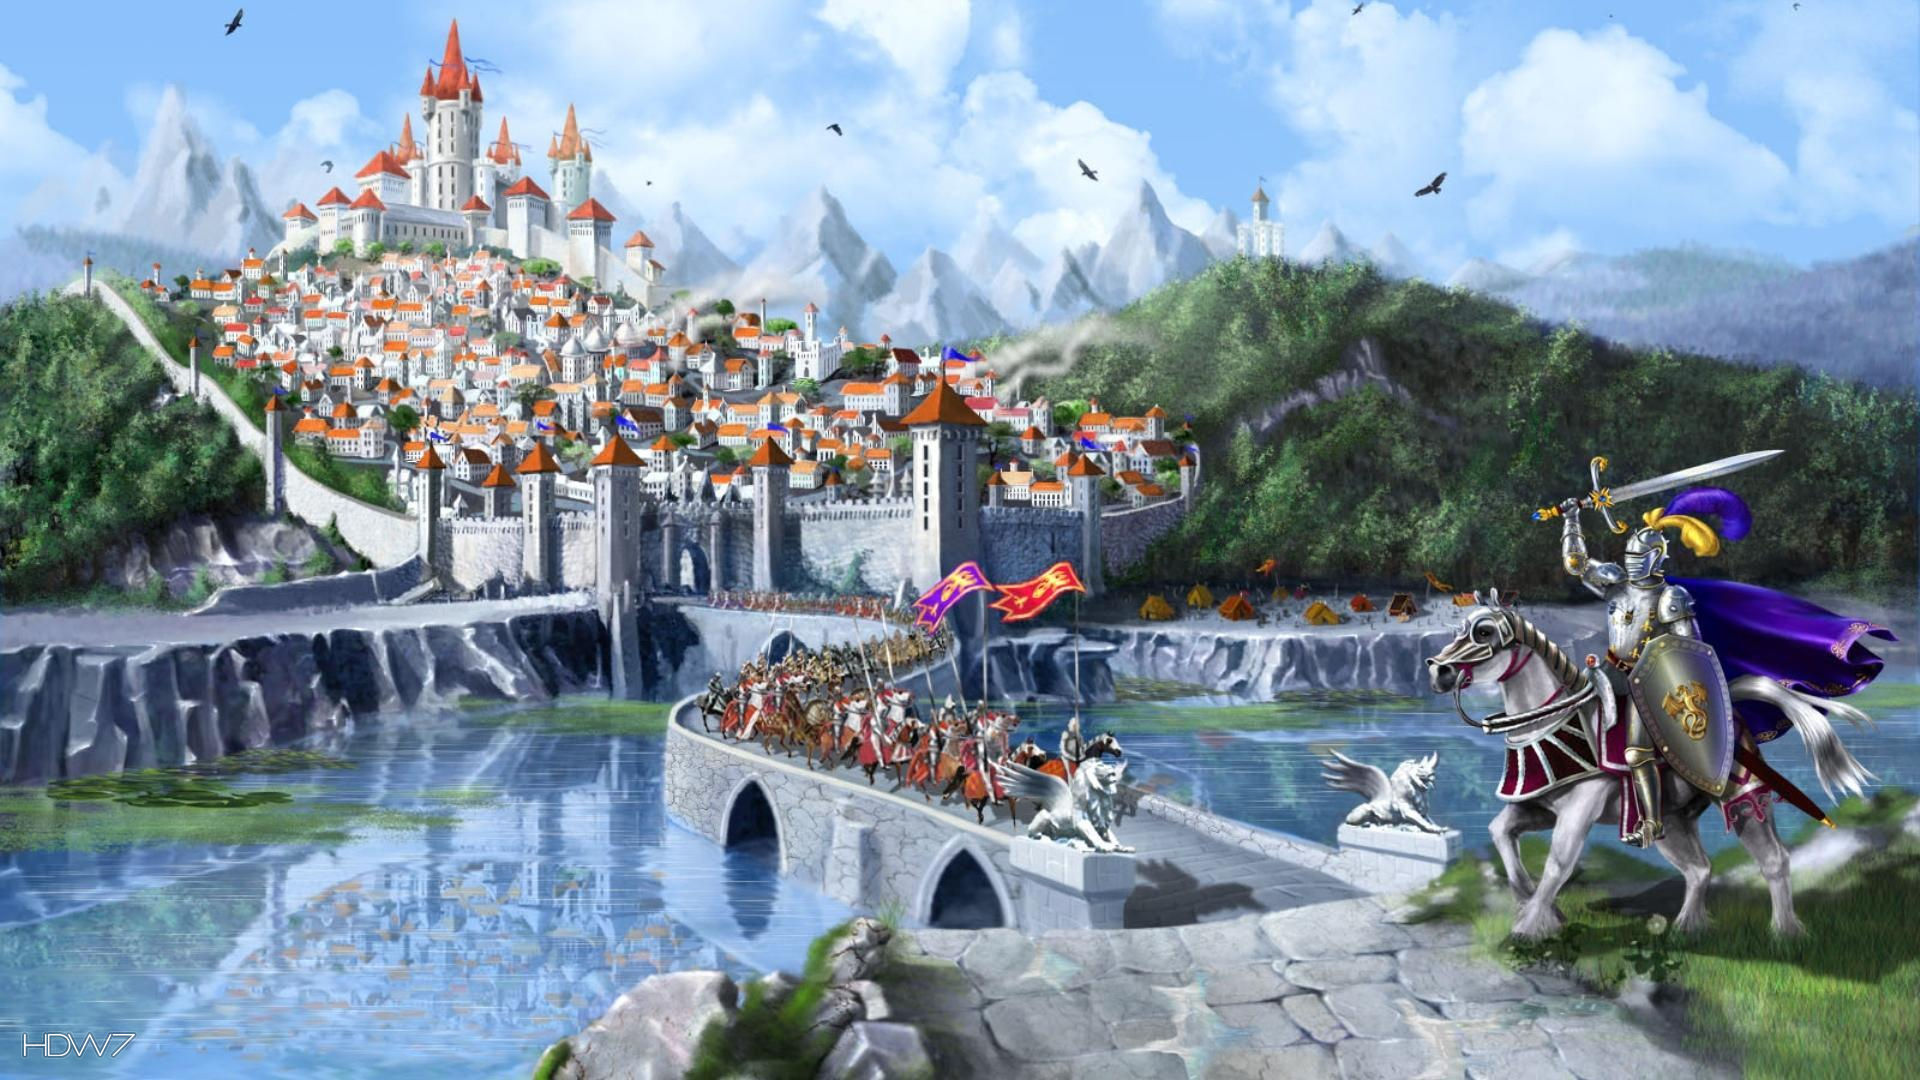 Middle Ages Fantasy City Castle - Medieval Knight Wallpaper Hd - HD Wallpaper 